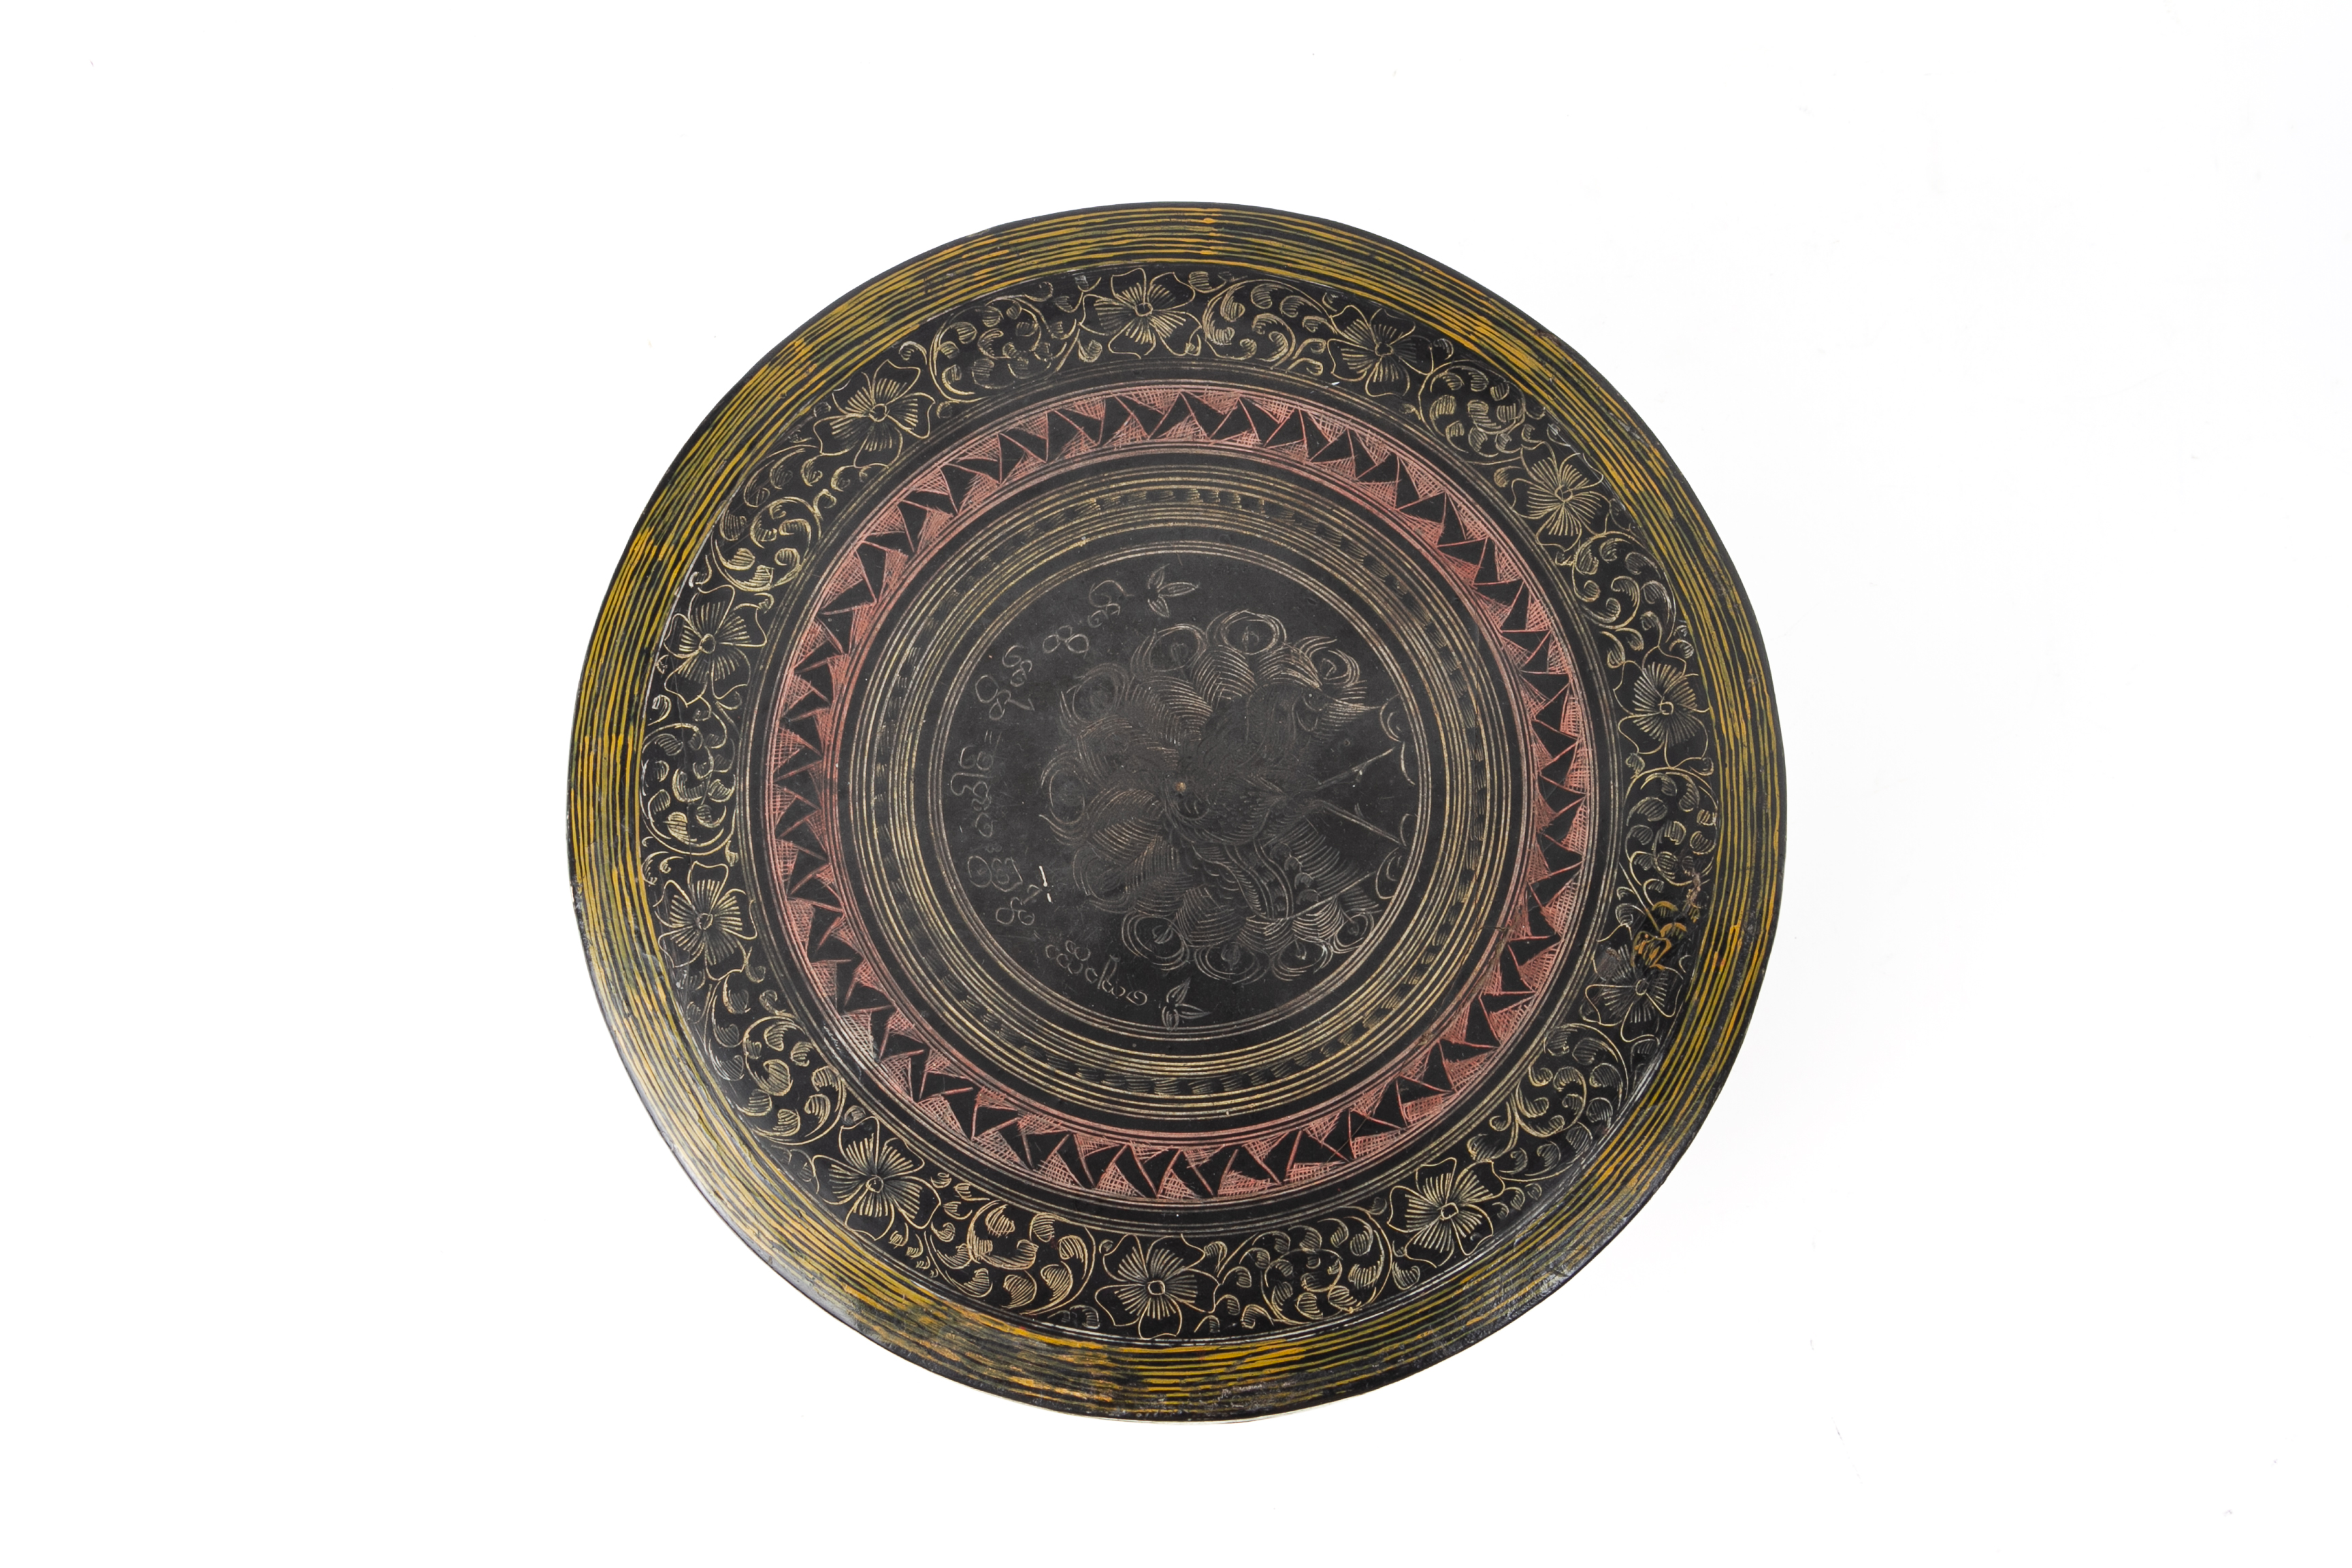 A LARGE BURMESE BLACK LACQUER CYLINDRICAL BETEL BOX - Image 3 of 3